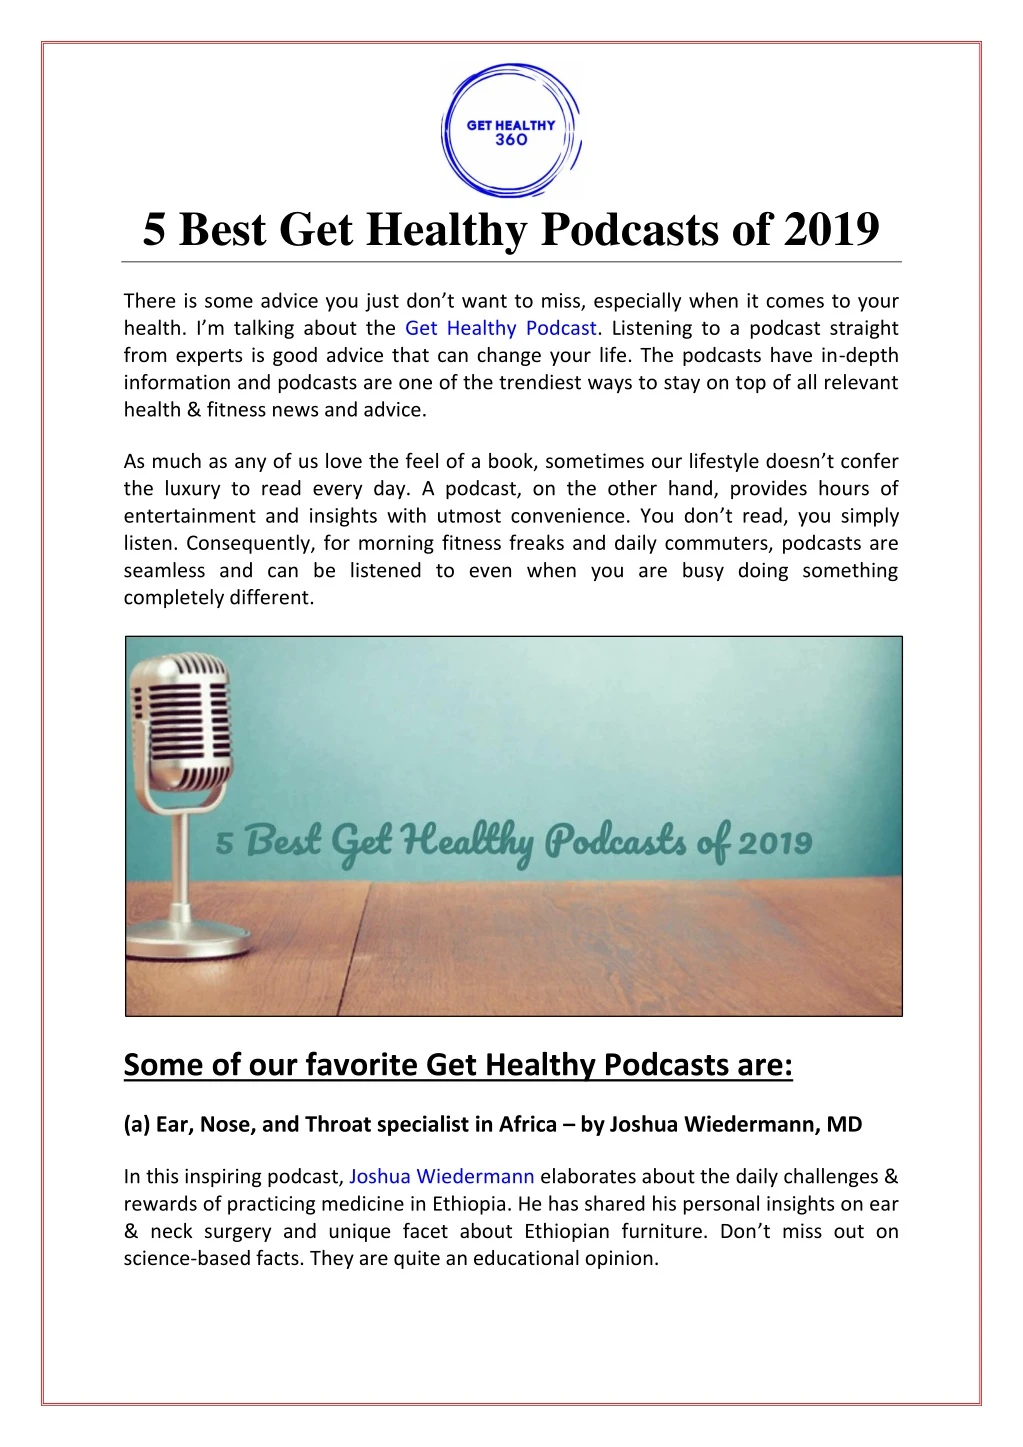 5 best get healthy podcasts of 2019